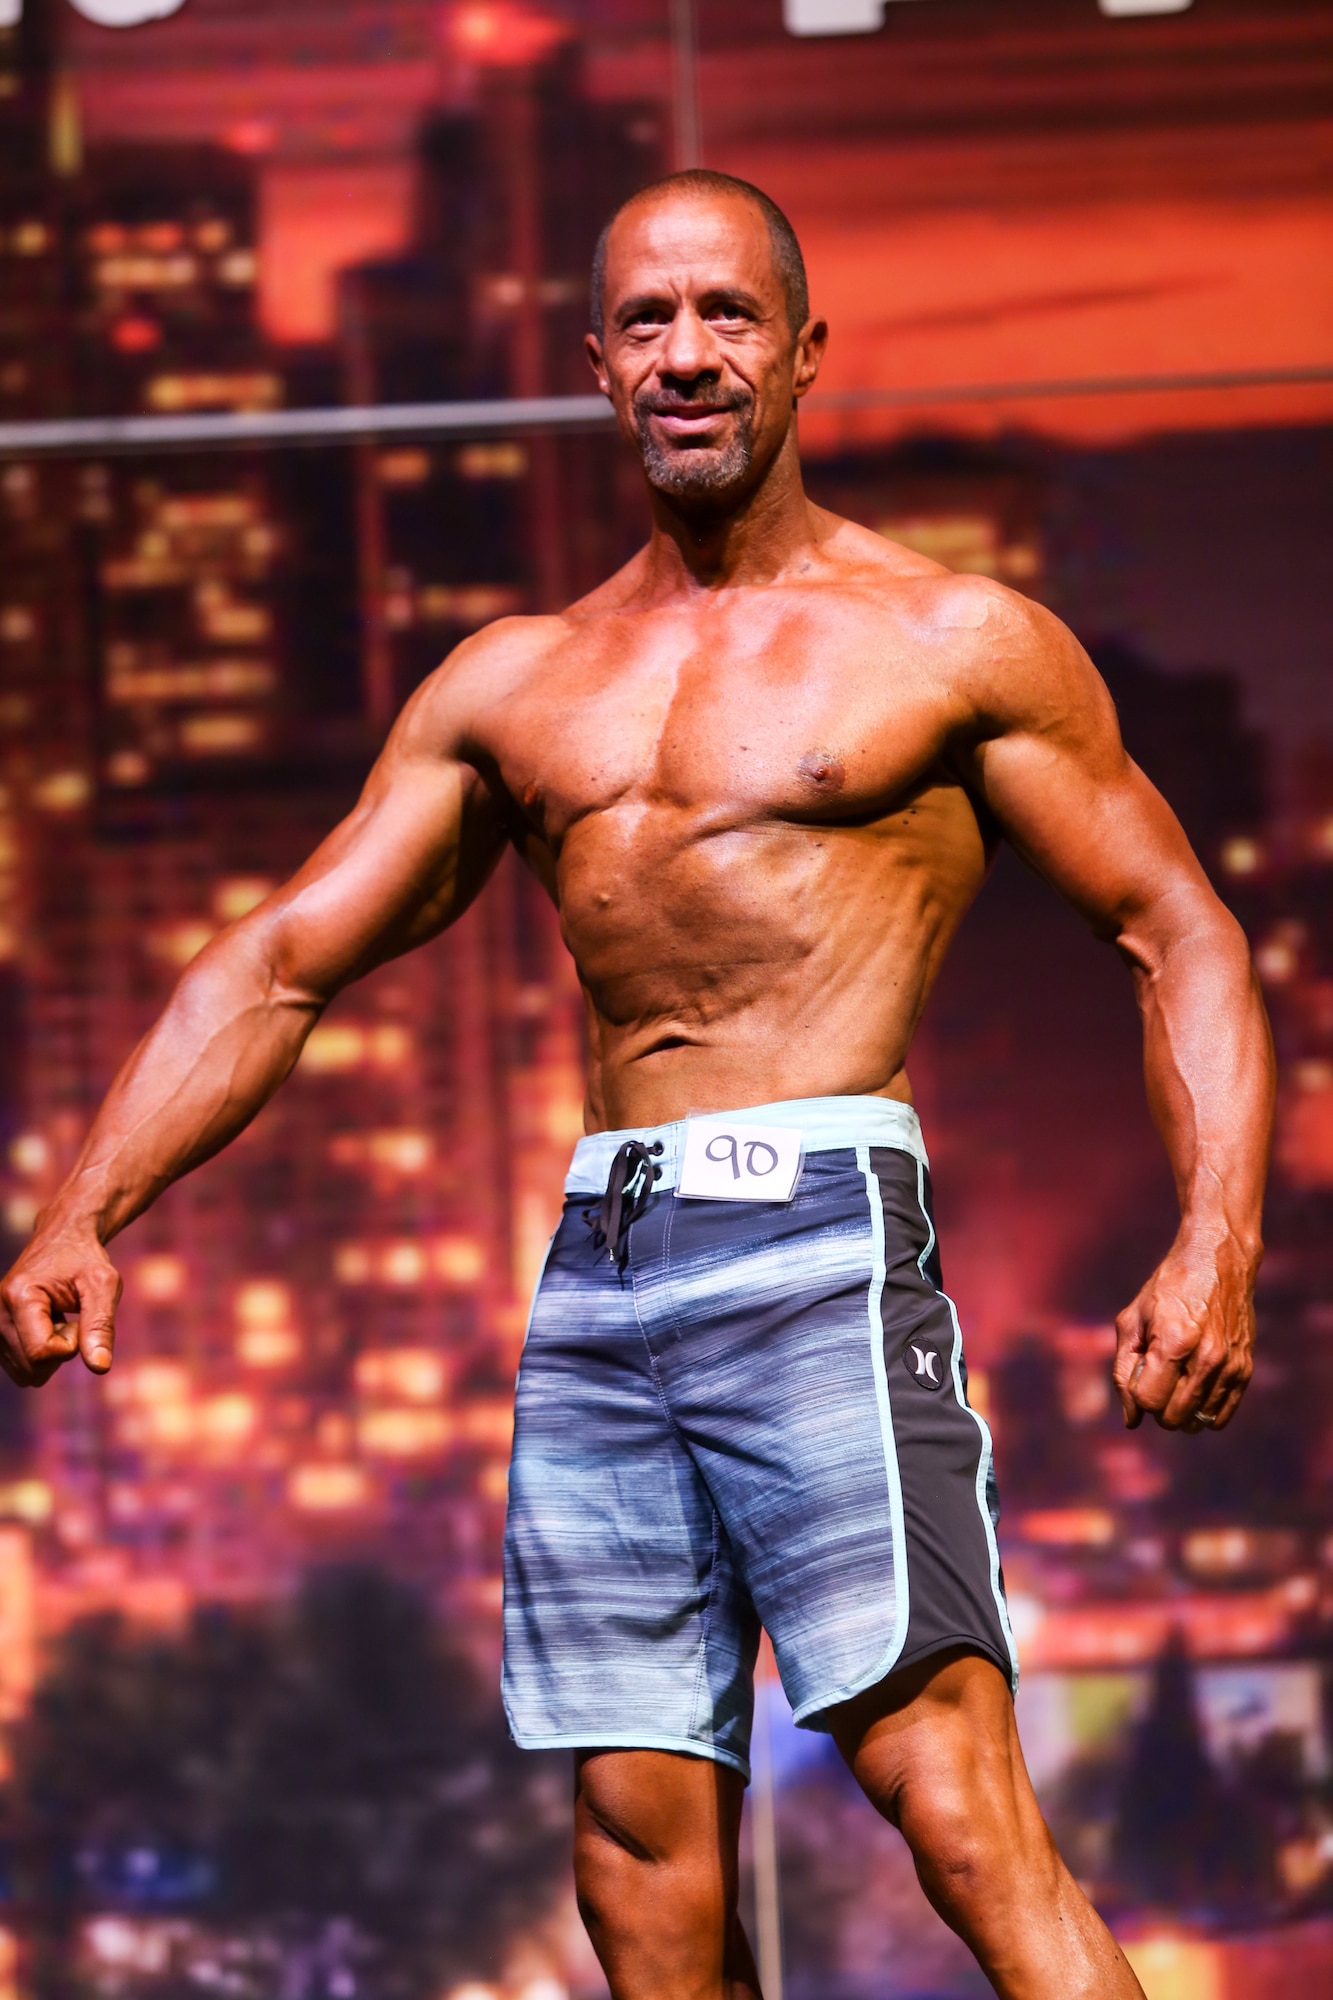 Richard Gonzales, 225th Air Defense Group personnel specialist, wins first palce in the Men’s Physique Masters 50 & Older class at the Washington State Championship for bodybuilding at the Auburn Performing Arts Center in Auburn, Aug. 4, 2018. (Courtesy Photo by Richard Gonzales)